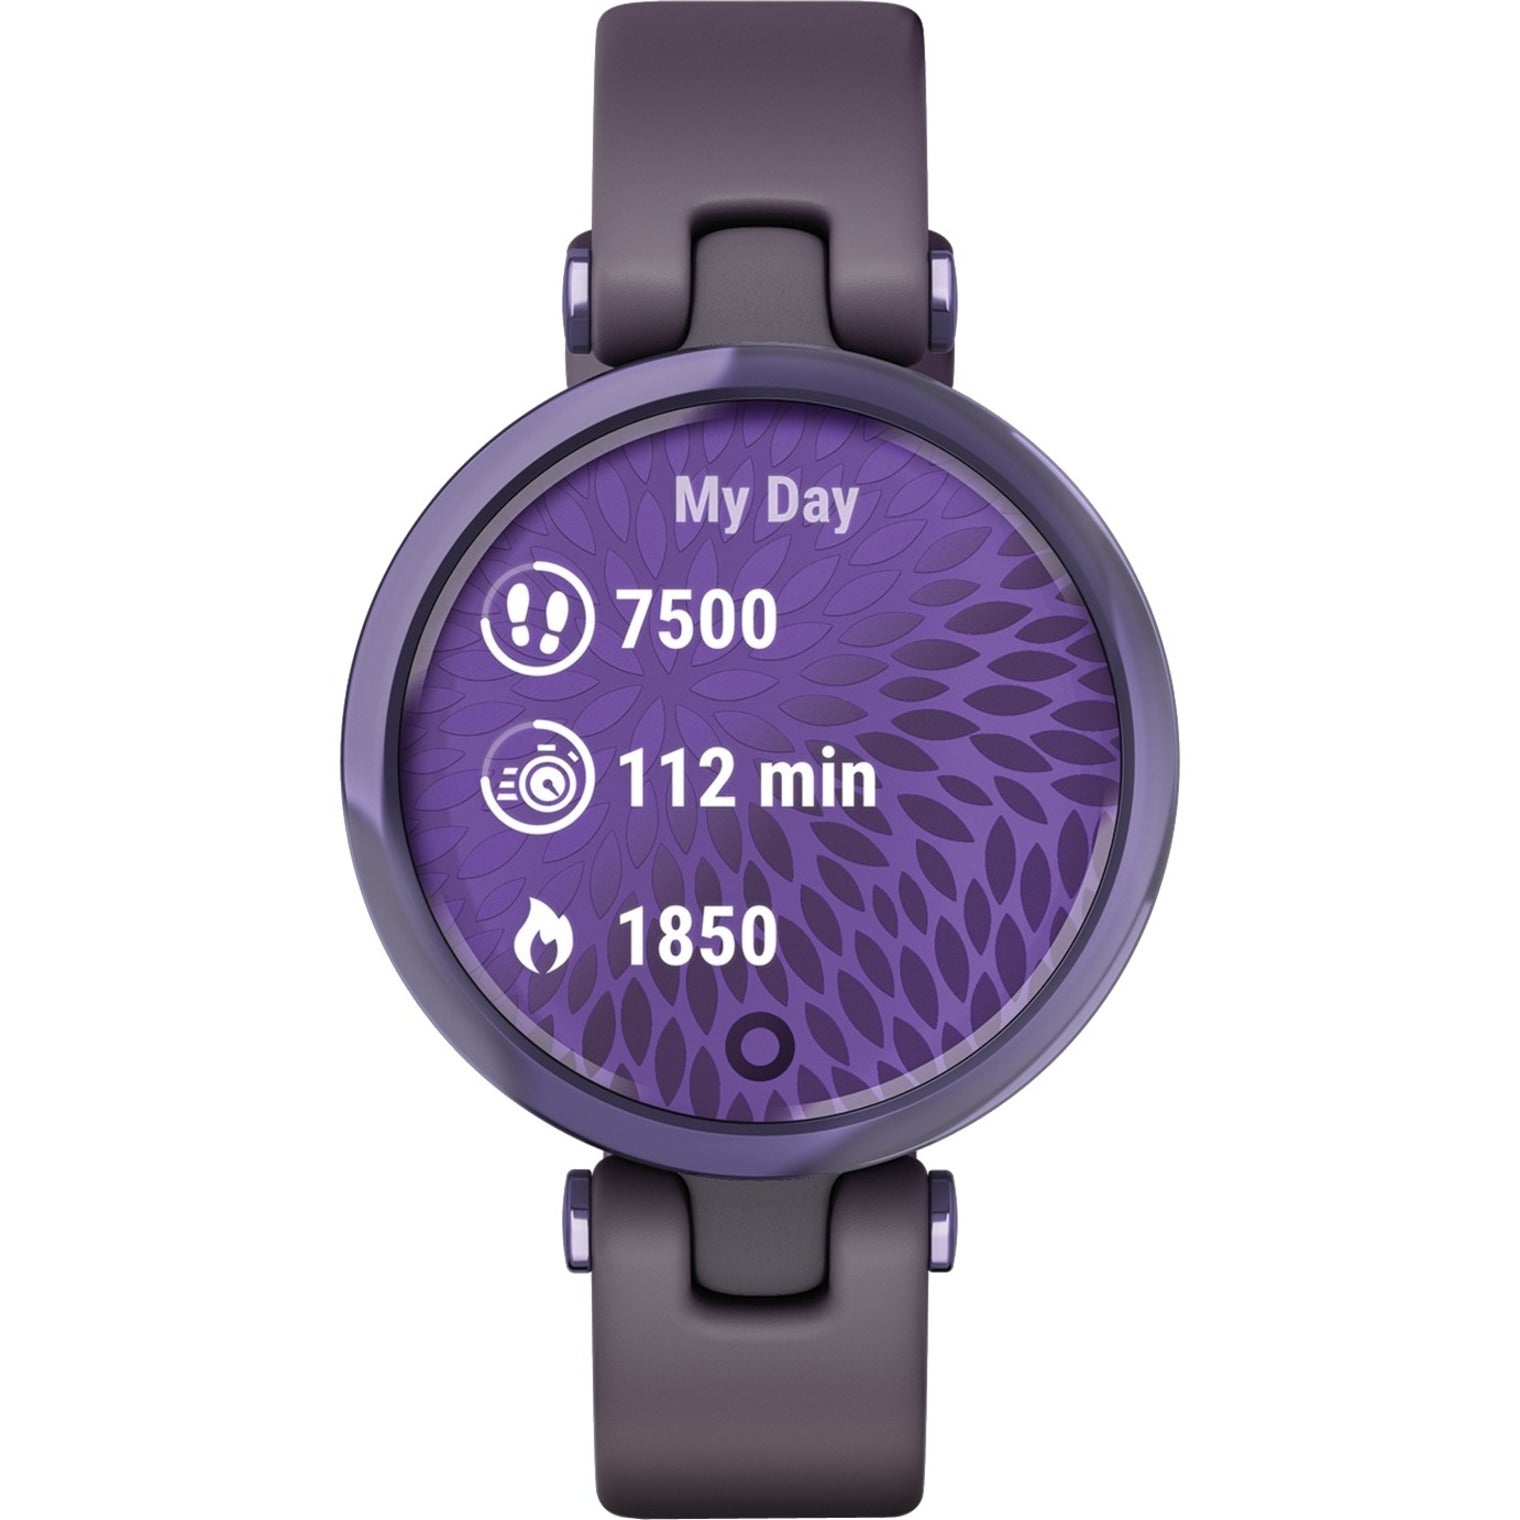 Garmin Lily Smart Watch - Water Resistant, Touchscreen, Fitness Tracker [Discontinued]